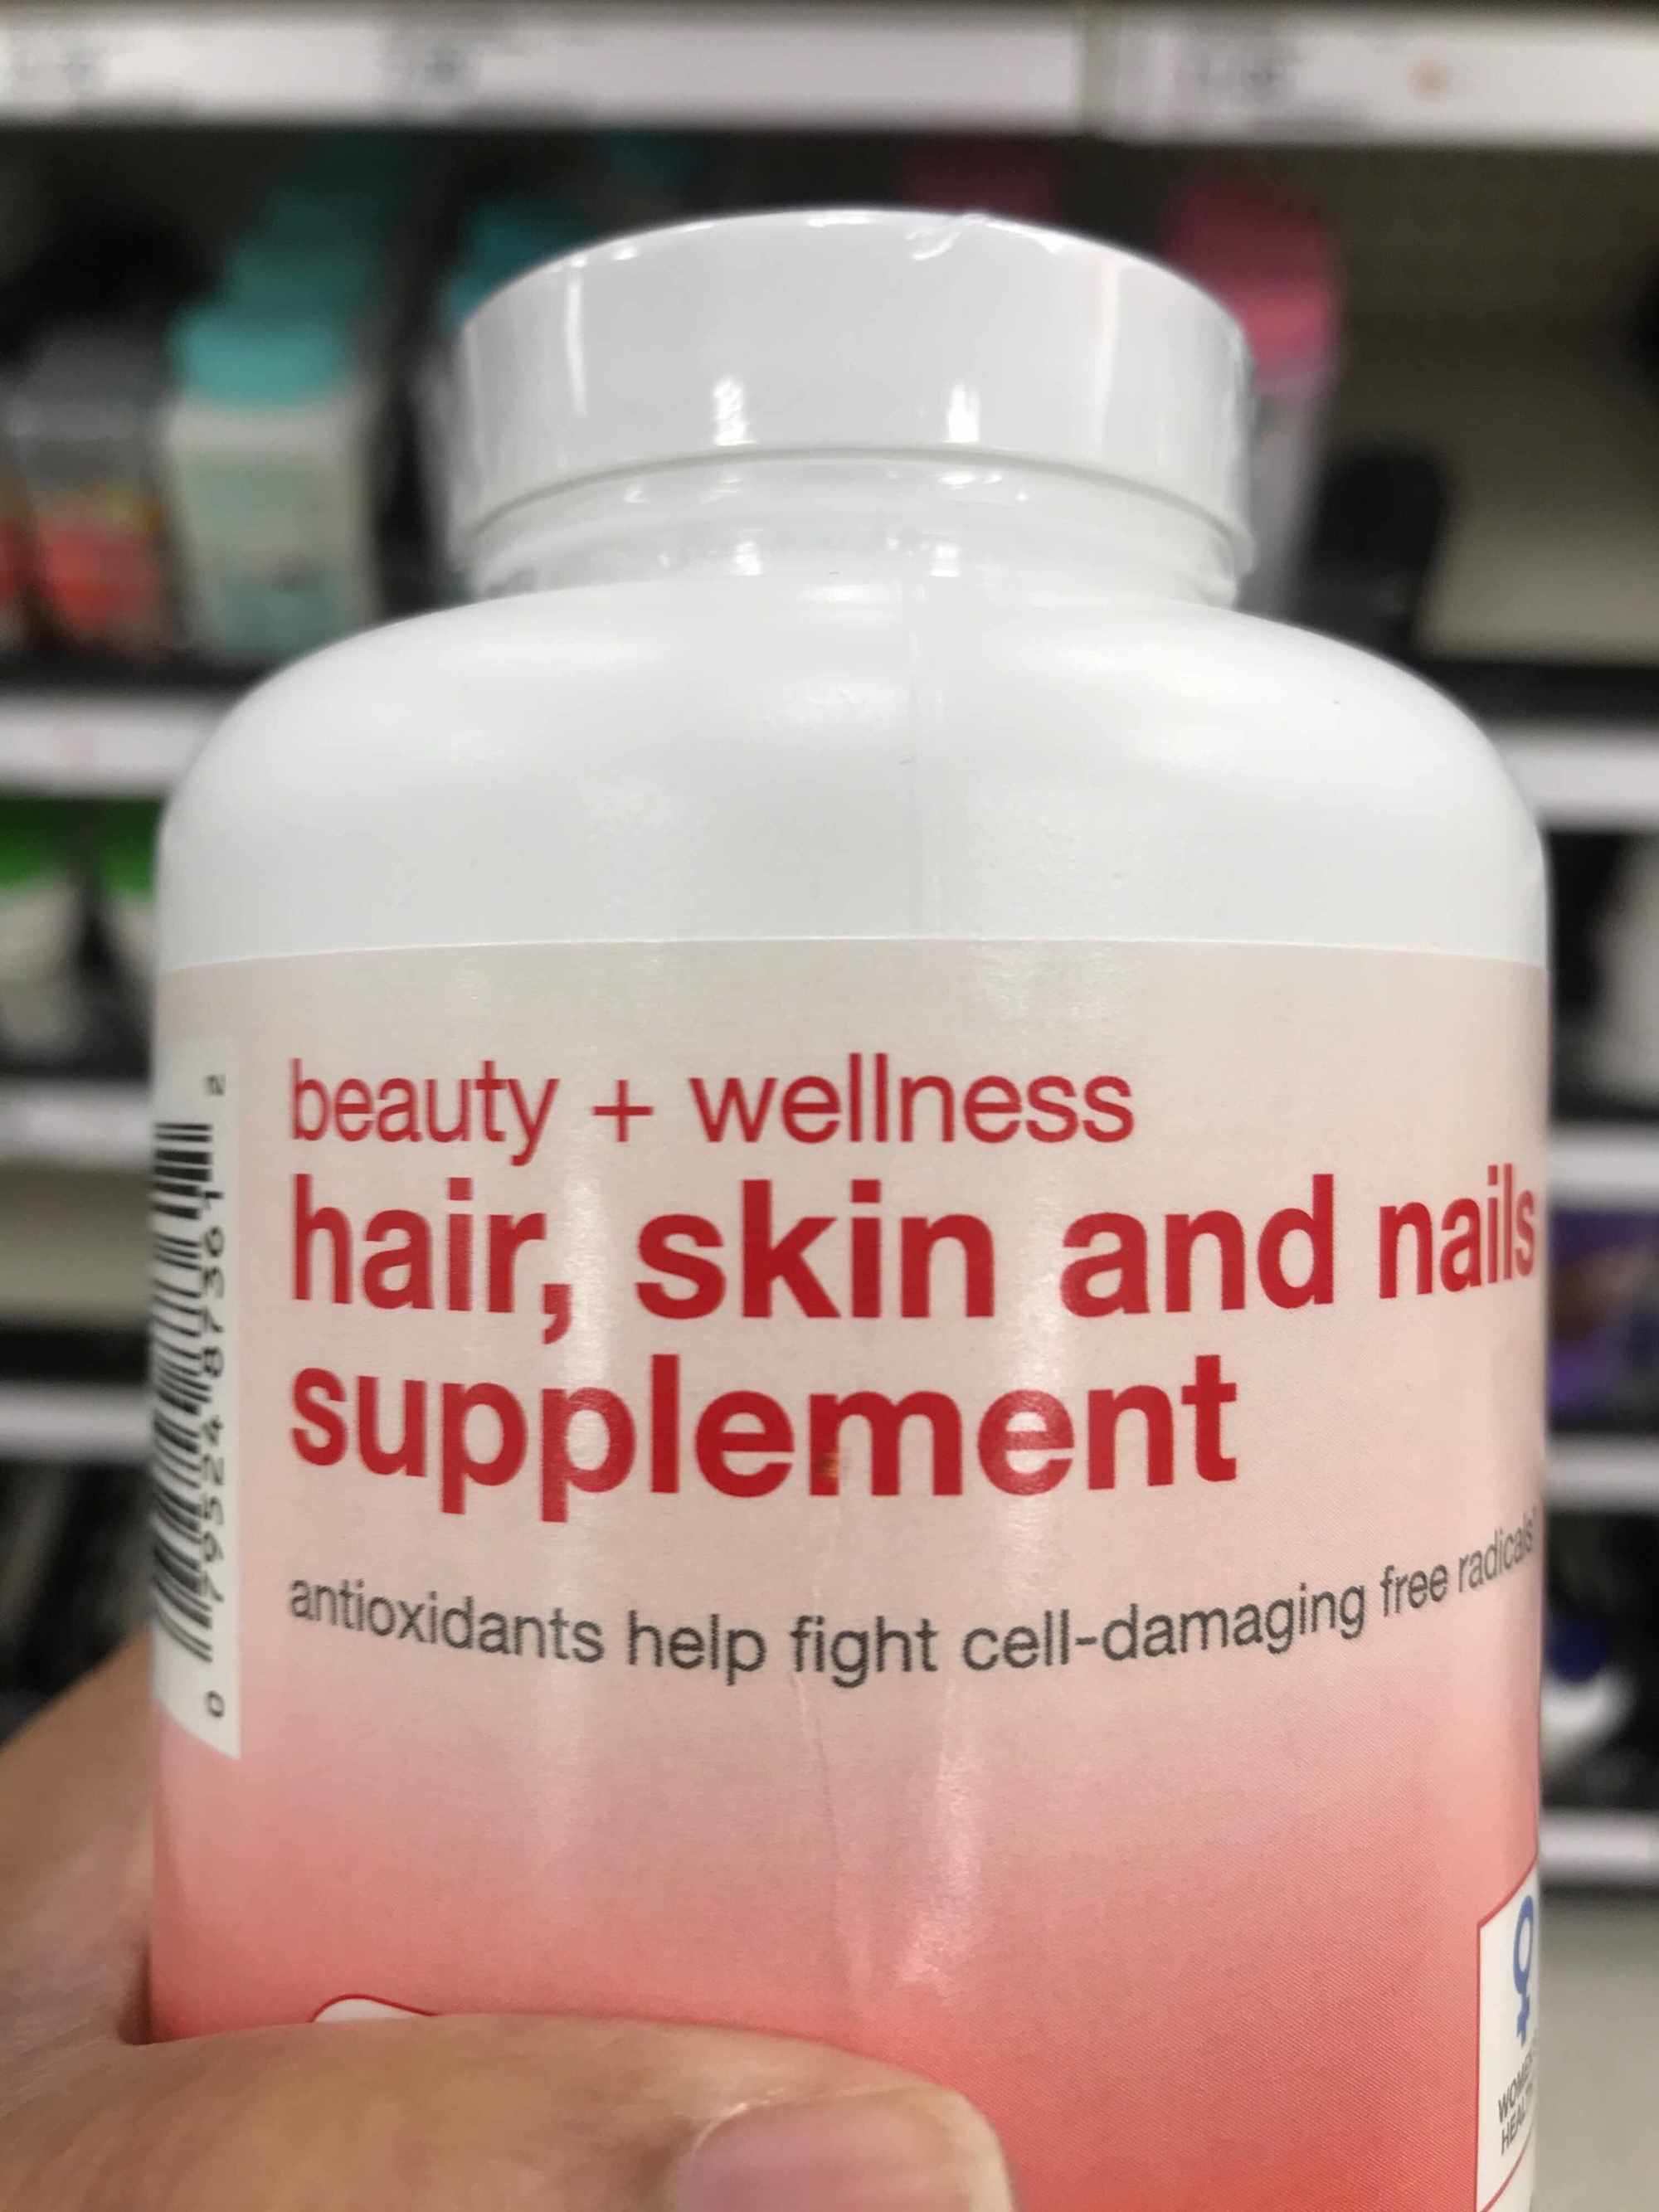 Cureus | Safety Concerns of Skin, Hair and Nail Supplements in Retail  Stores | Article